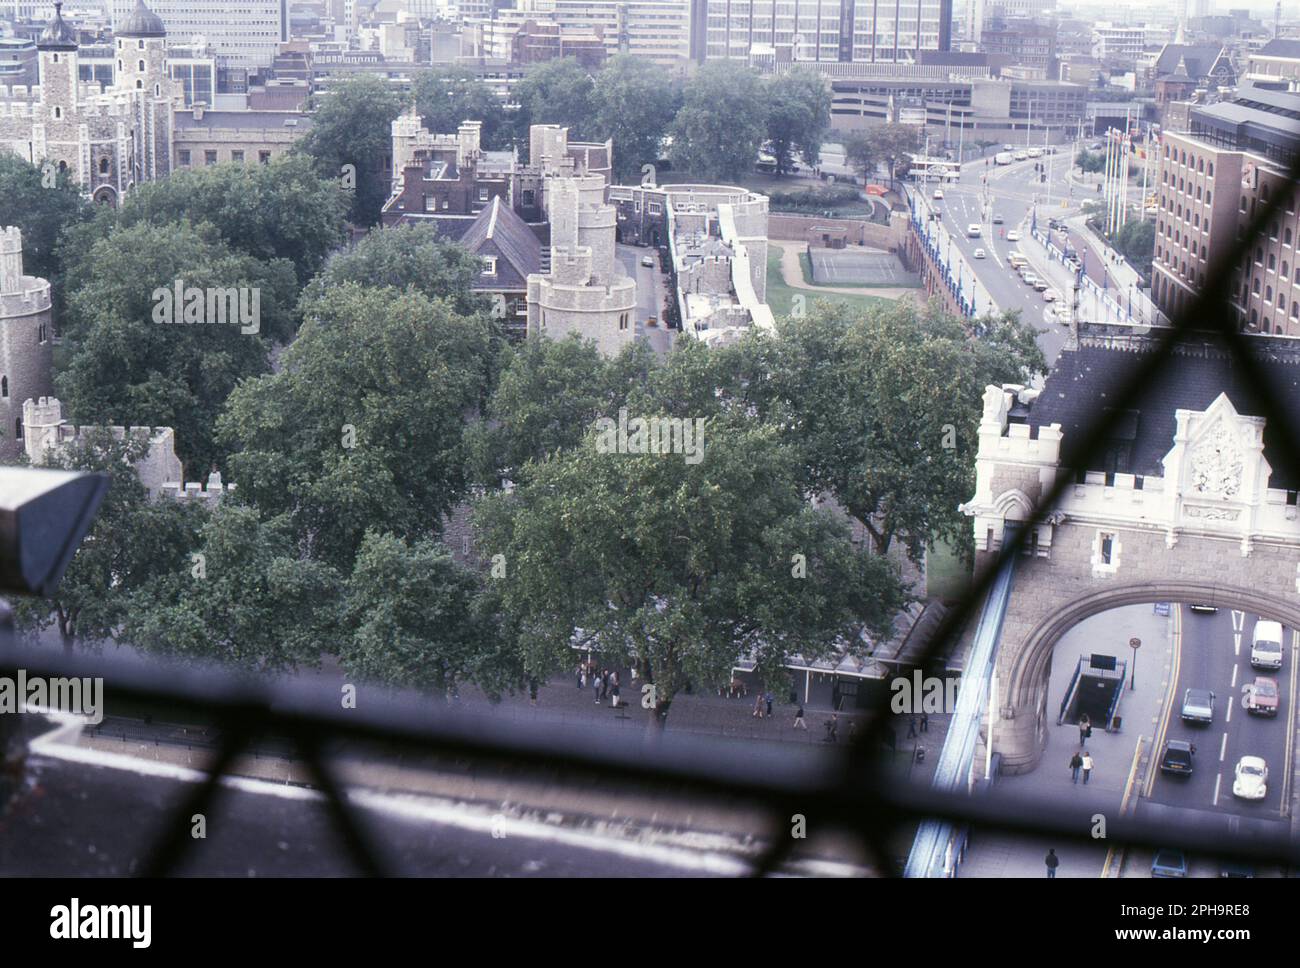 London. 1984. A view of the Tower of London and Tower Bridge Approach from the walkway of Tower Bridge, spanning the River Thames in London, England. Stock Photo